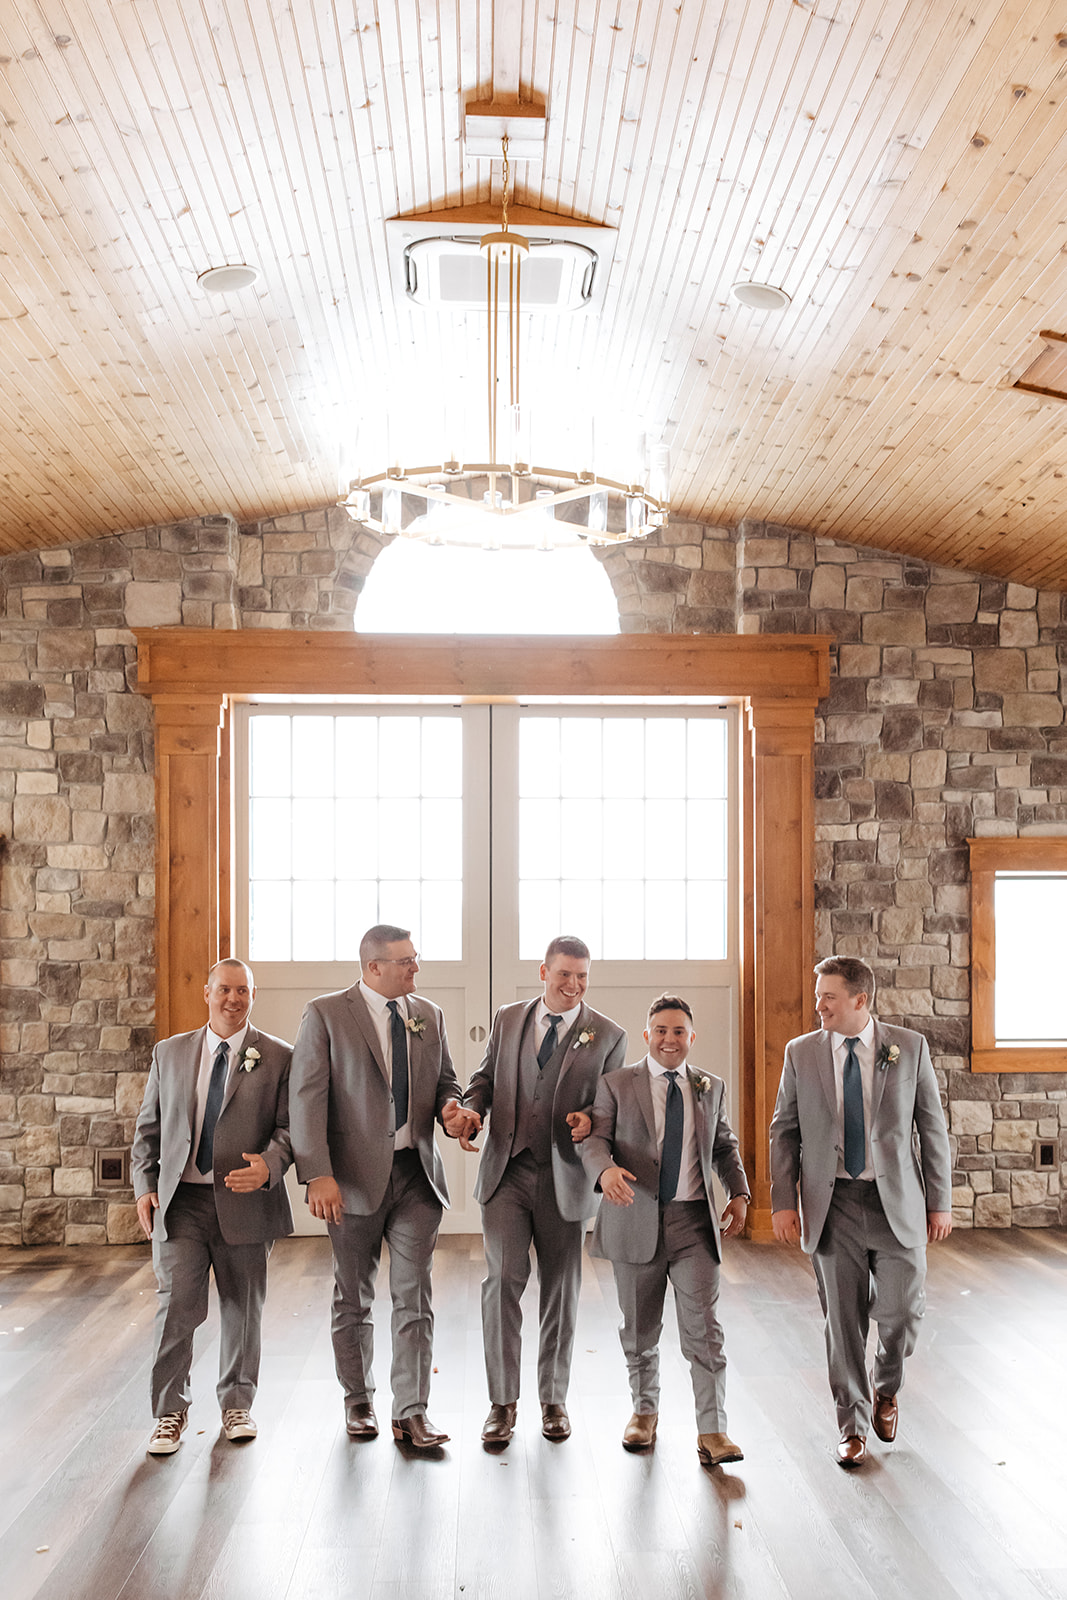 the groom with his groomsmen